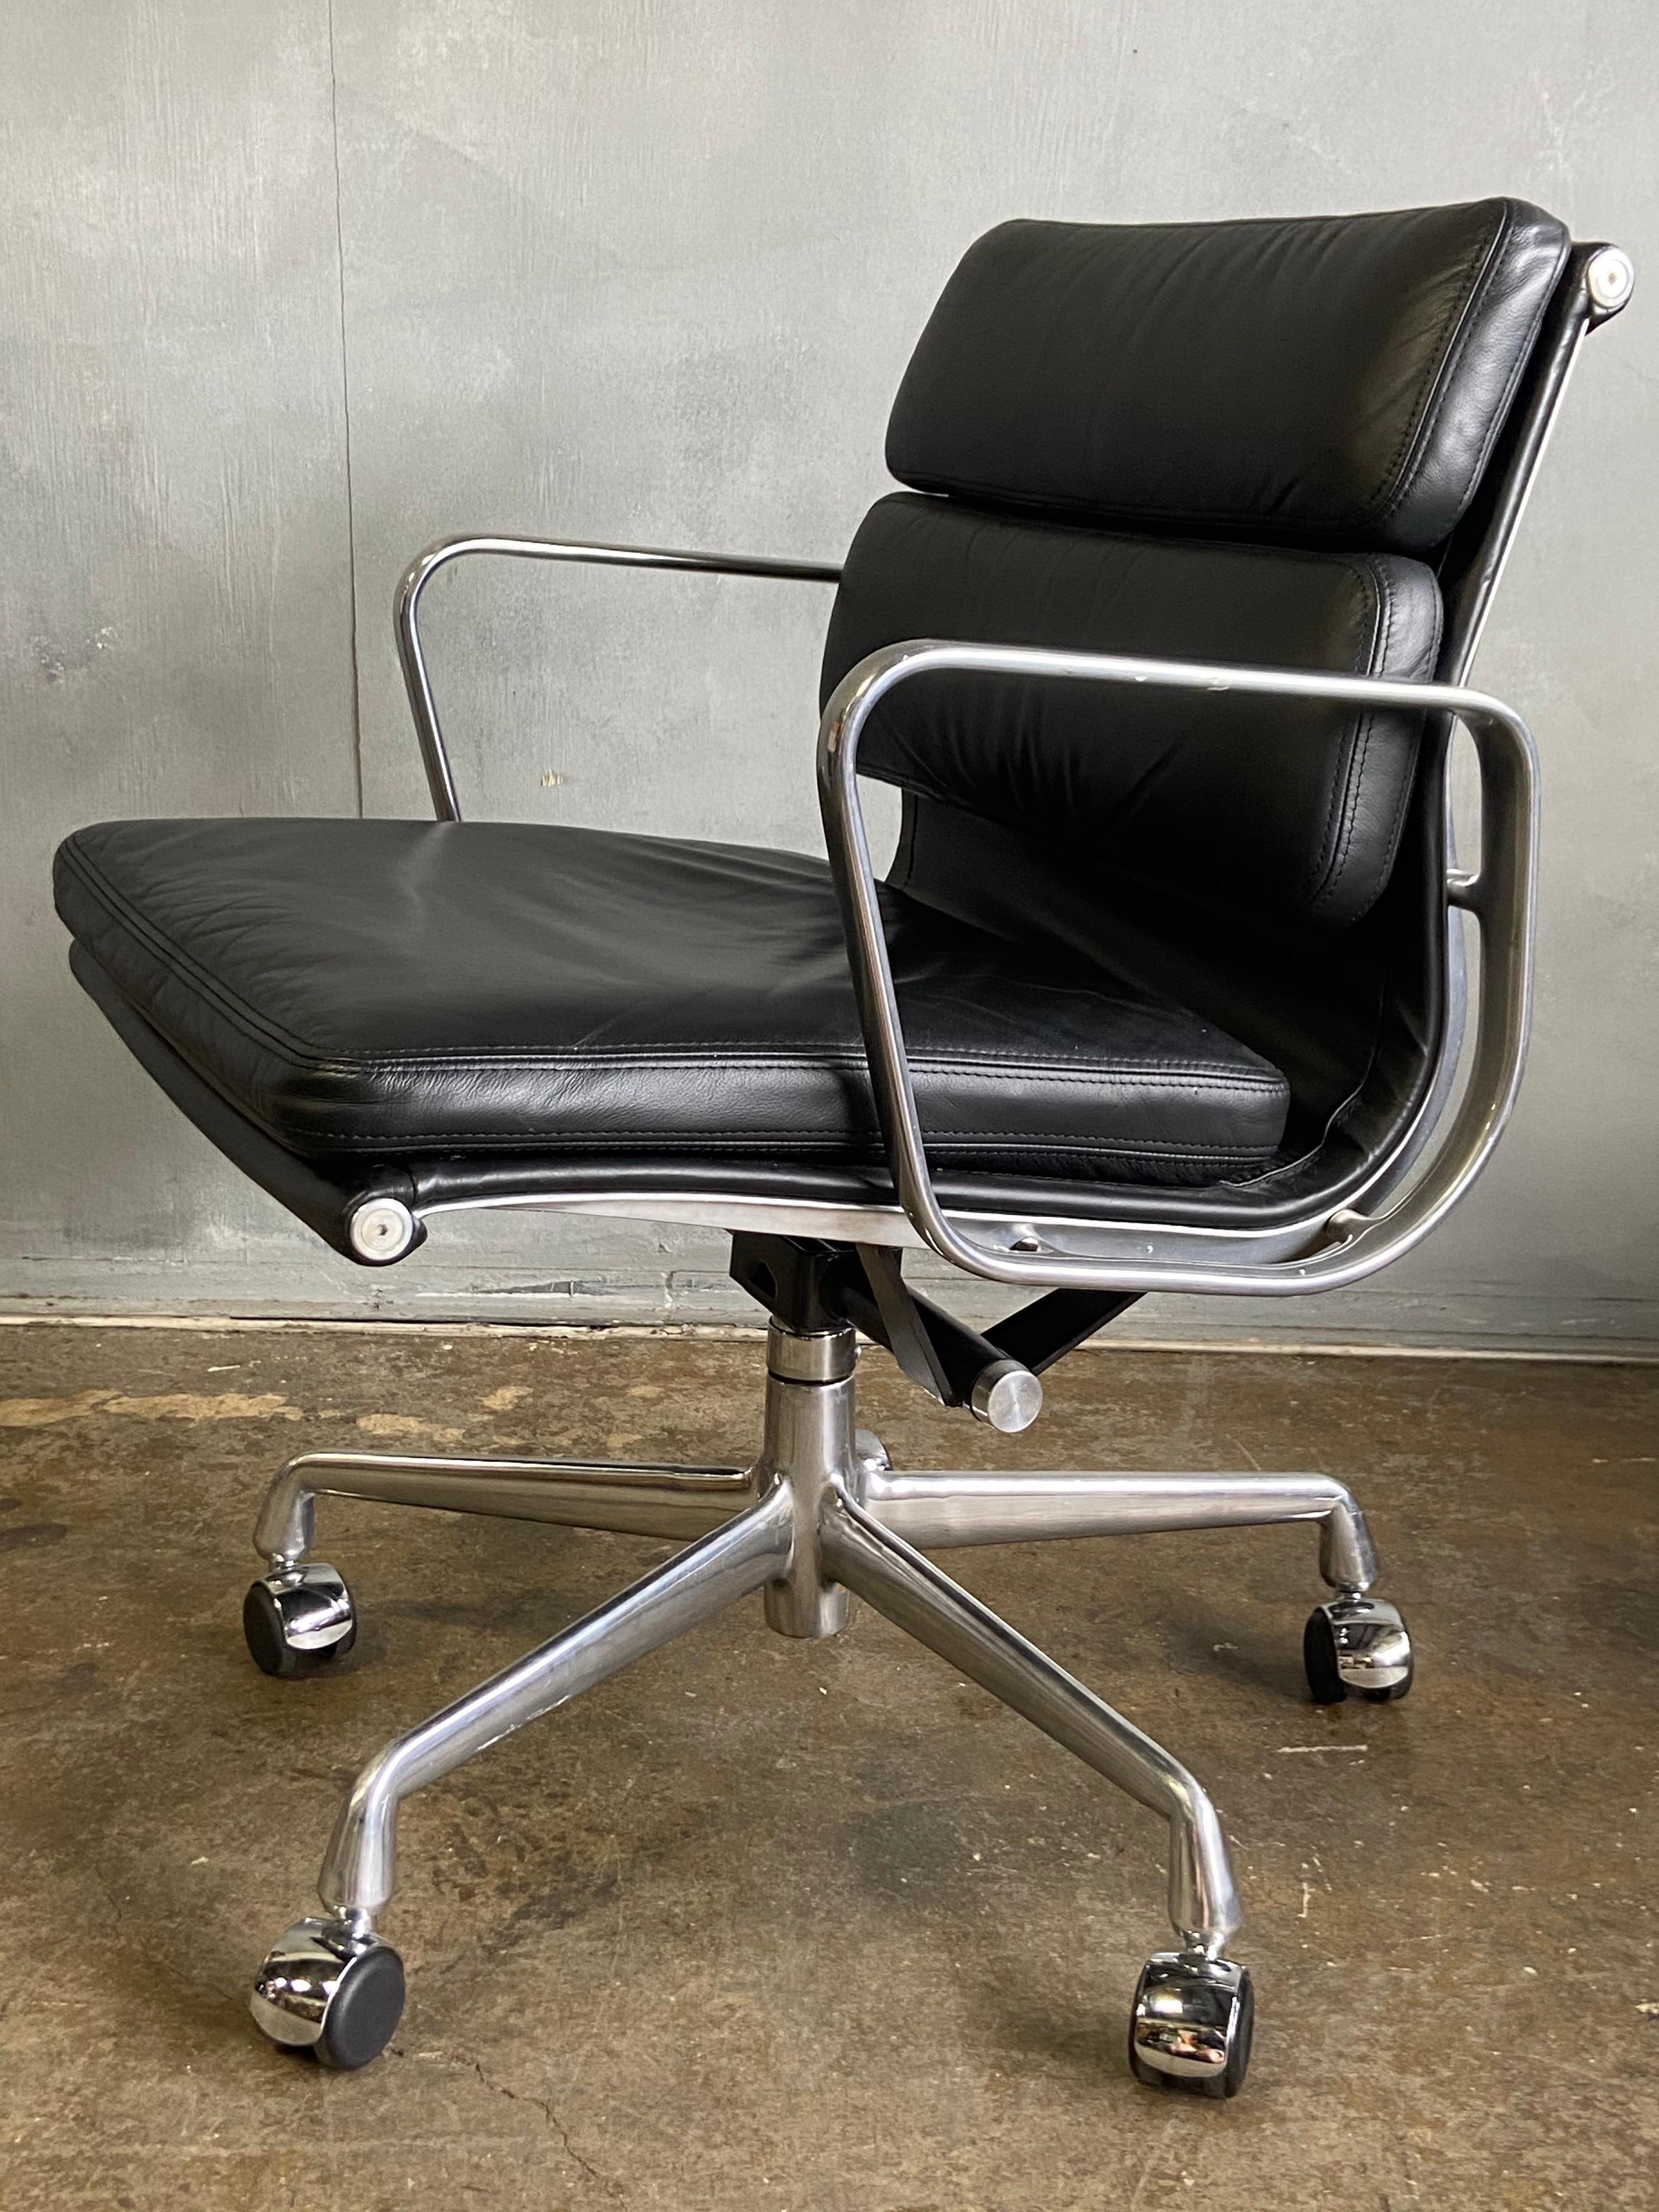  Eames for Herman Miller Soft Pad chairs in black leather with low backs. 

These authentic vintage examples are icons of Mid-Century Modern design. The chairs part of the Eames aluminium group designed for Herman Miller revolutionized office